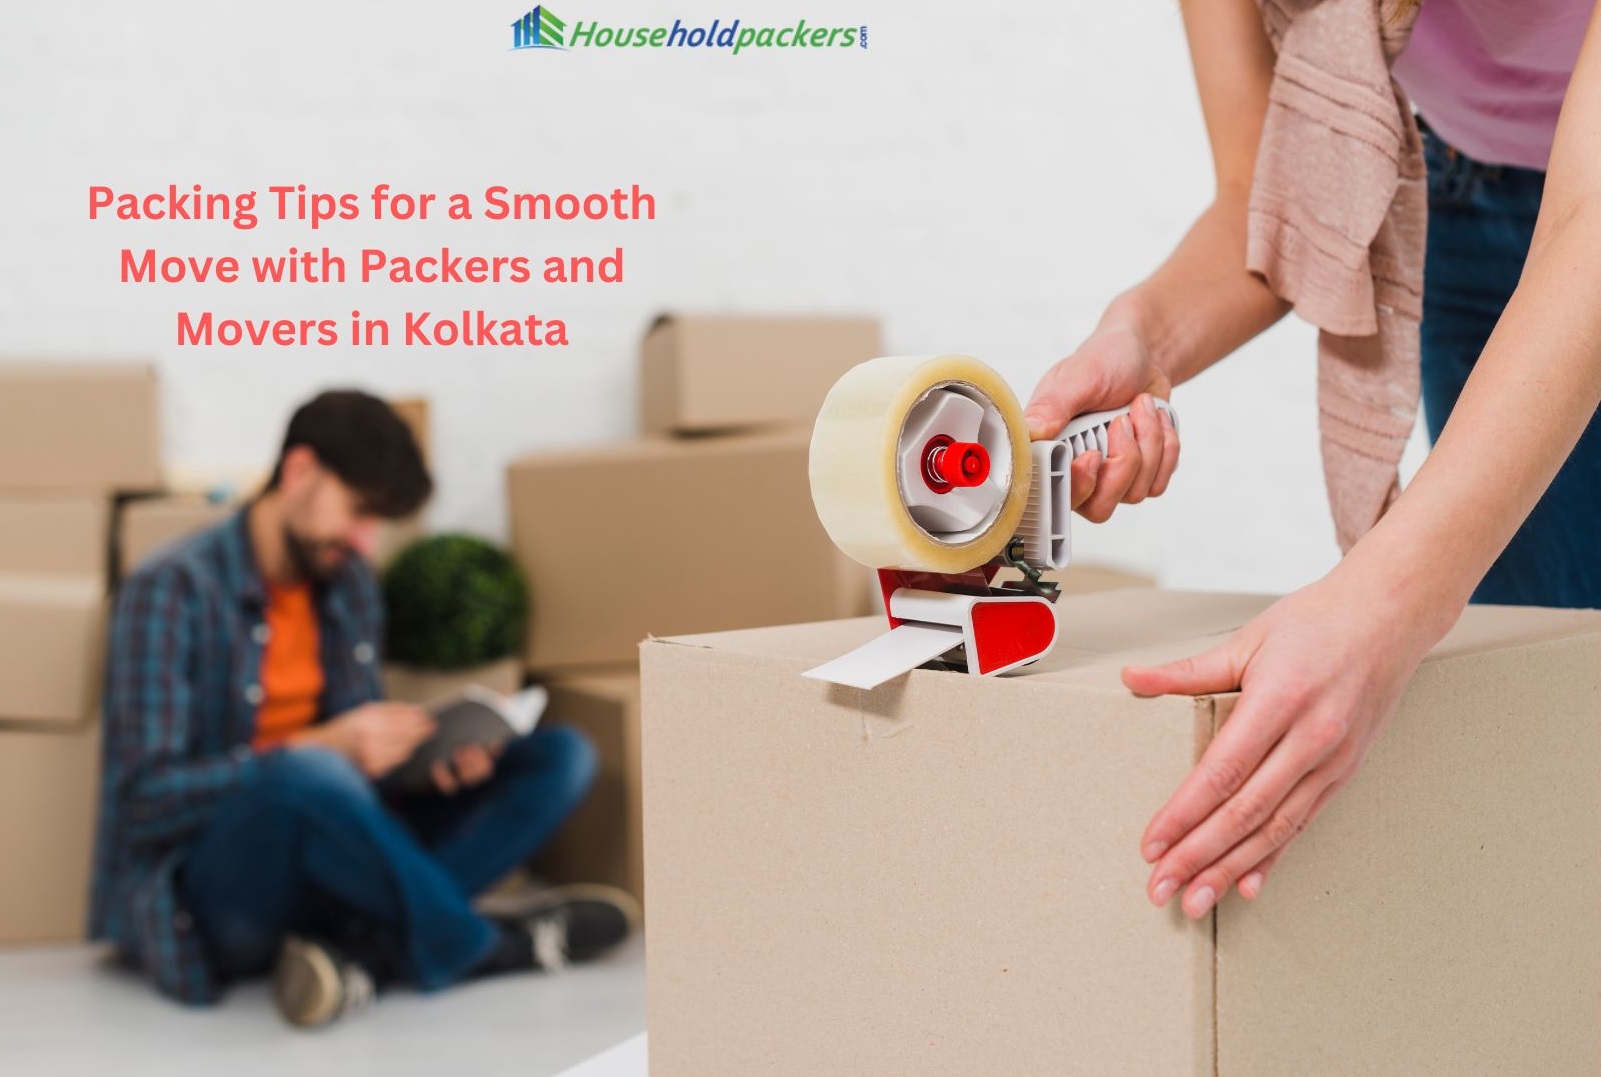 Packing Tips for a Smooth Move with Packers and Movers in Kolkata